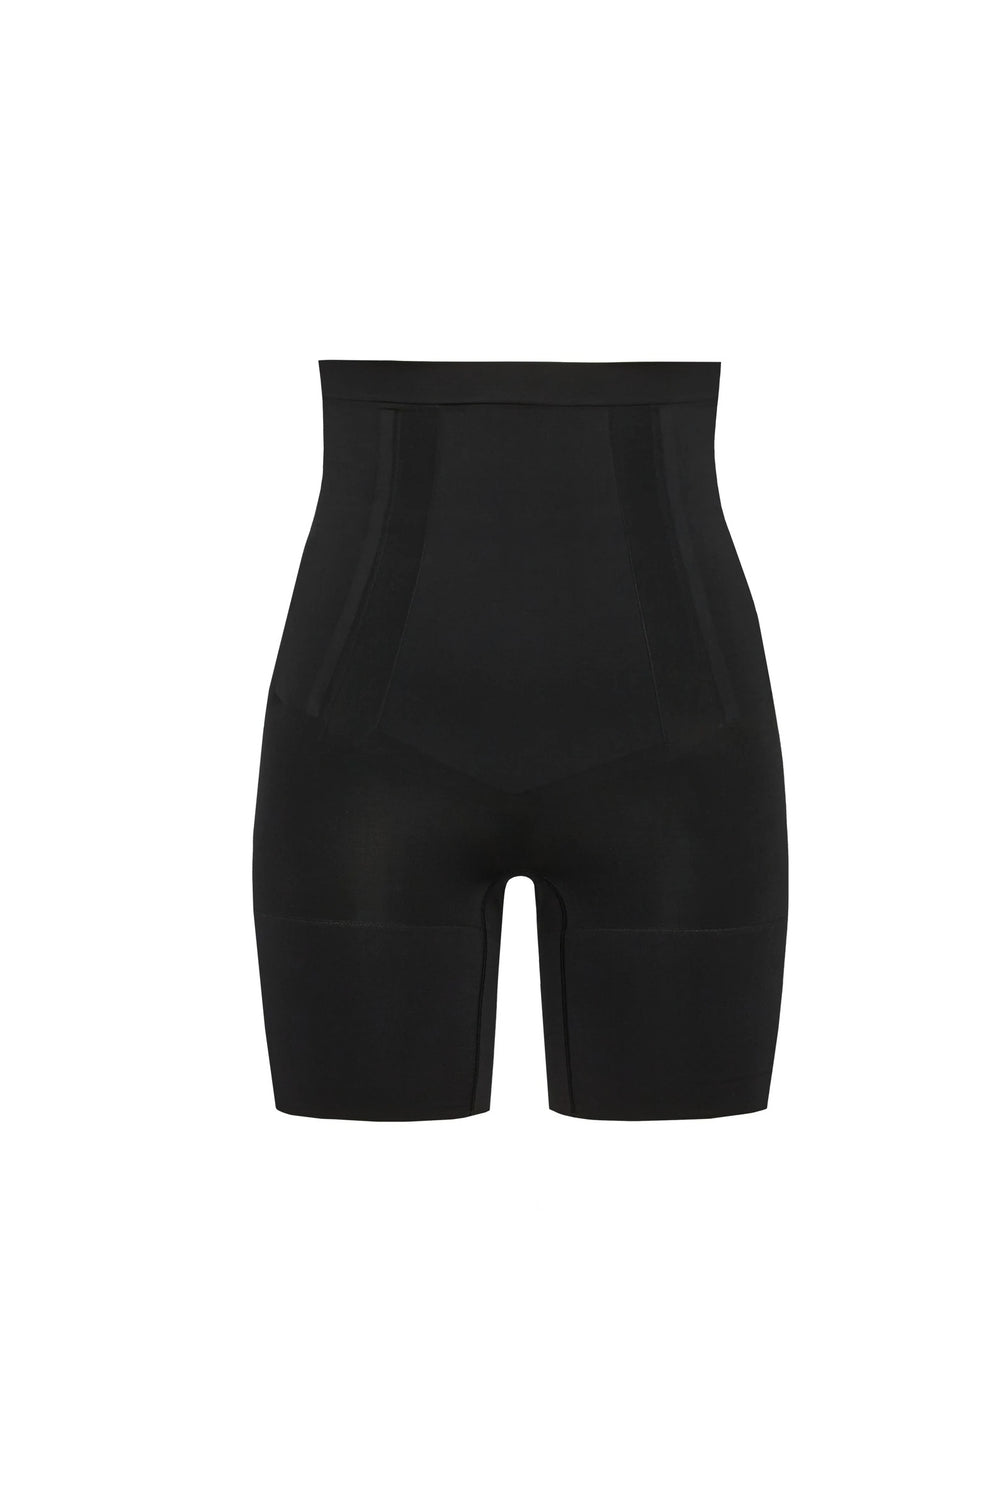 SPANX ONCORE HIGH-WAISTED MID-THIGH SHAPER SHORT BLACK